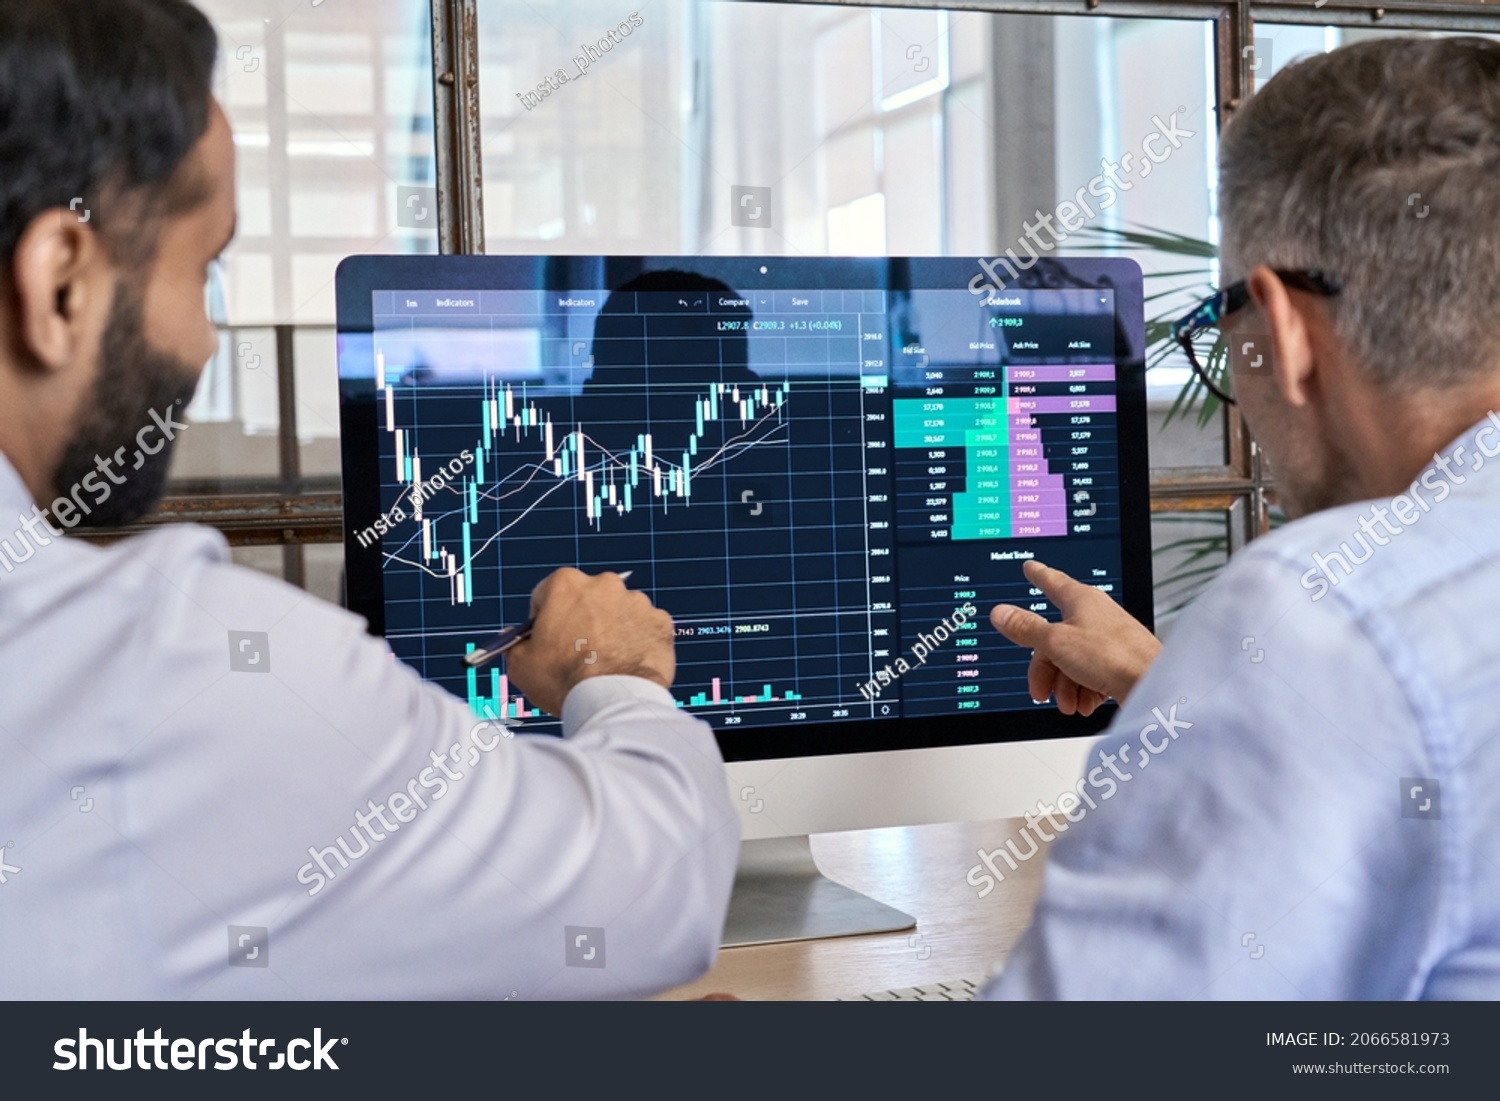 Two traders brokers stock exchange market investors discussing crypto trading charts growth using pc computer pointing at screen analyzing financial risks, investment profit forecast. Over shoulder #2066581973